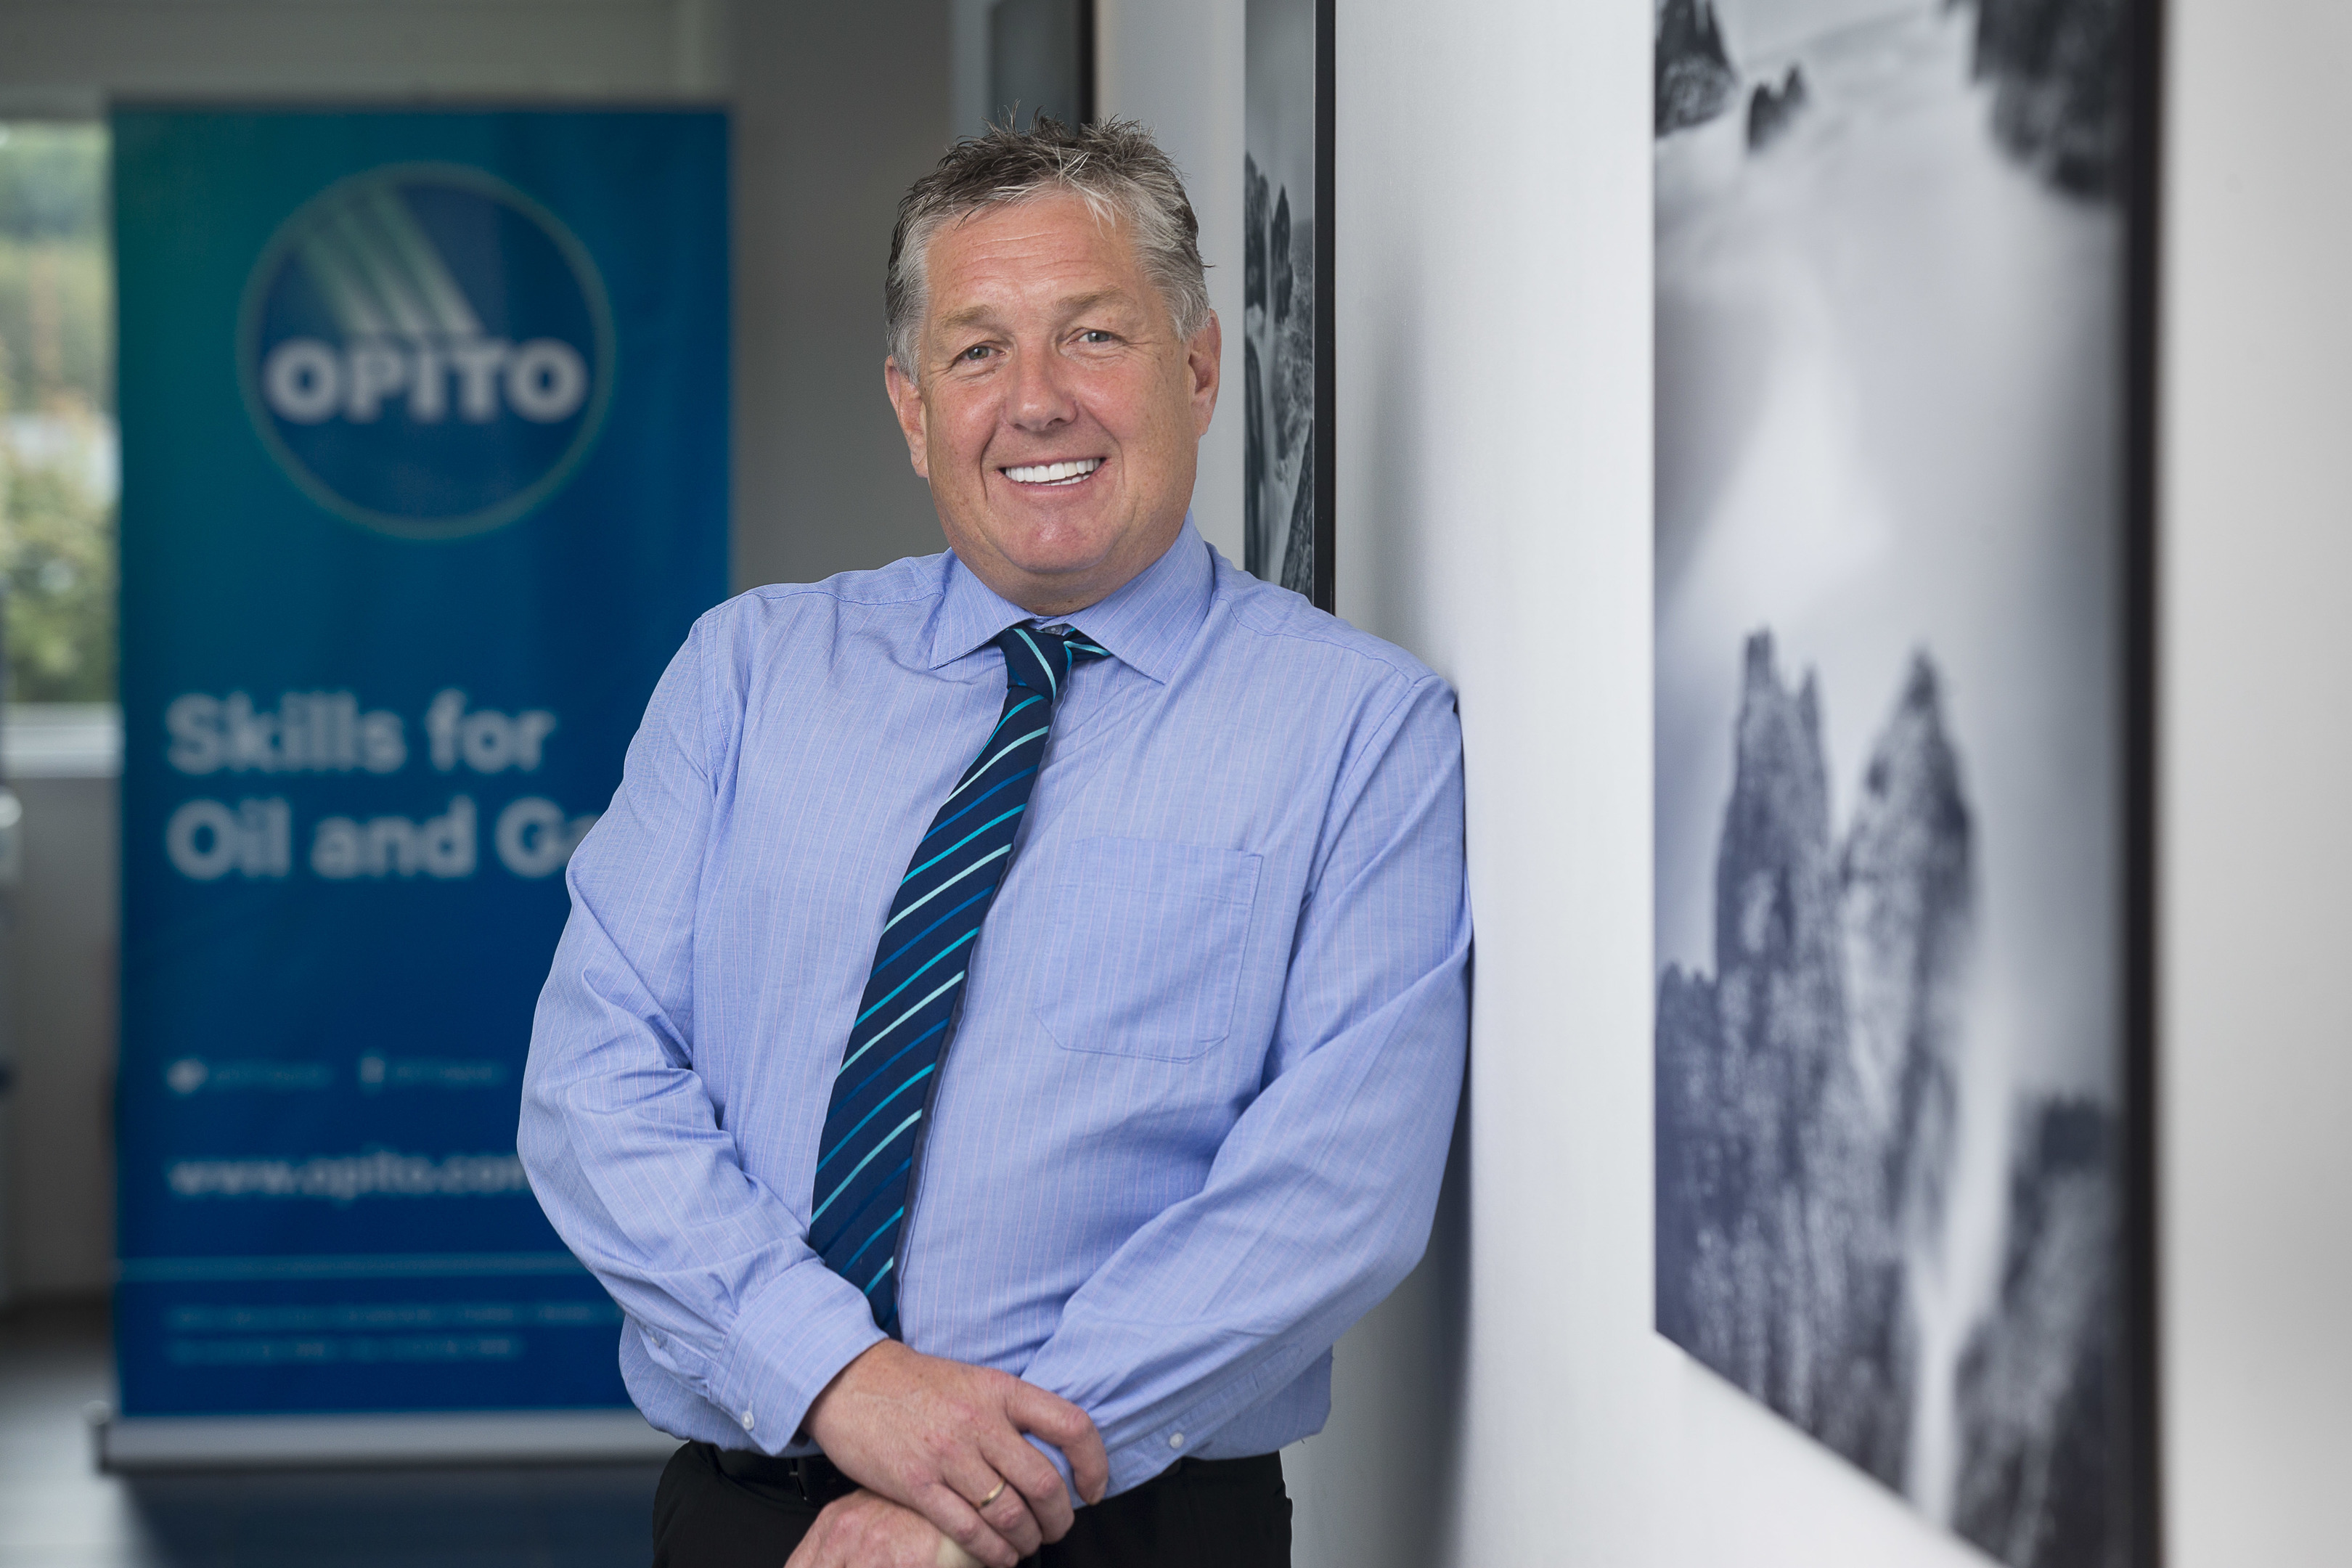 David Doig, former group chief executive of OPITO